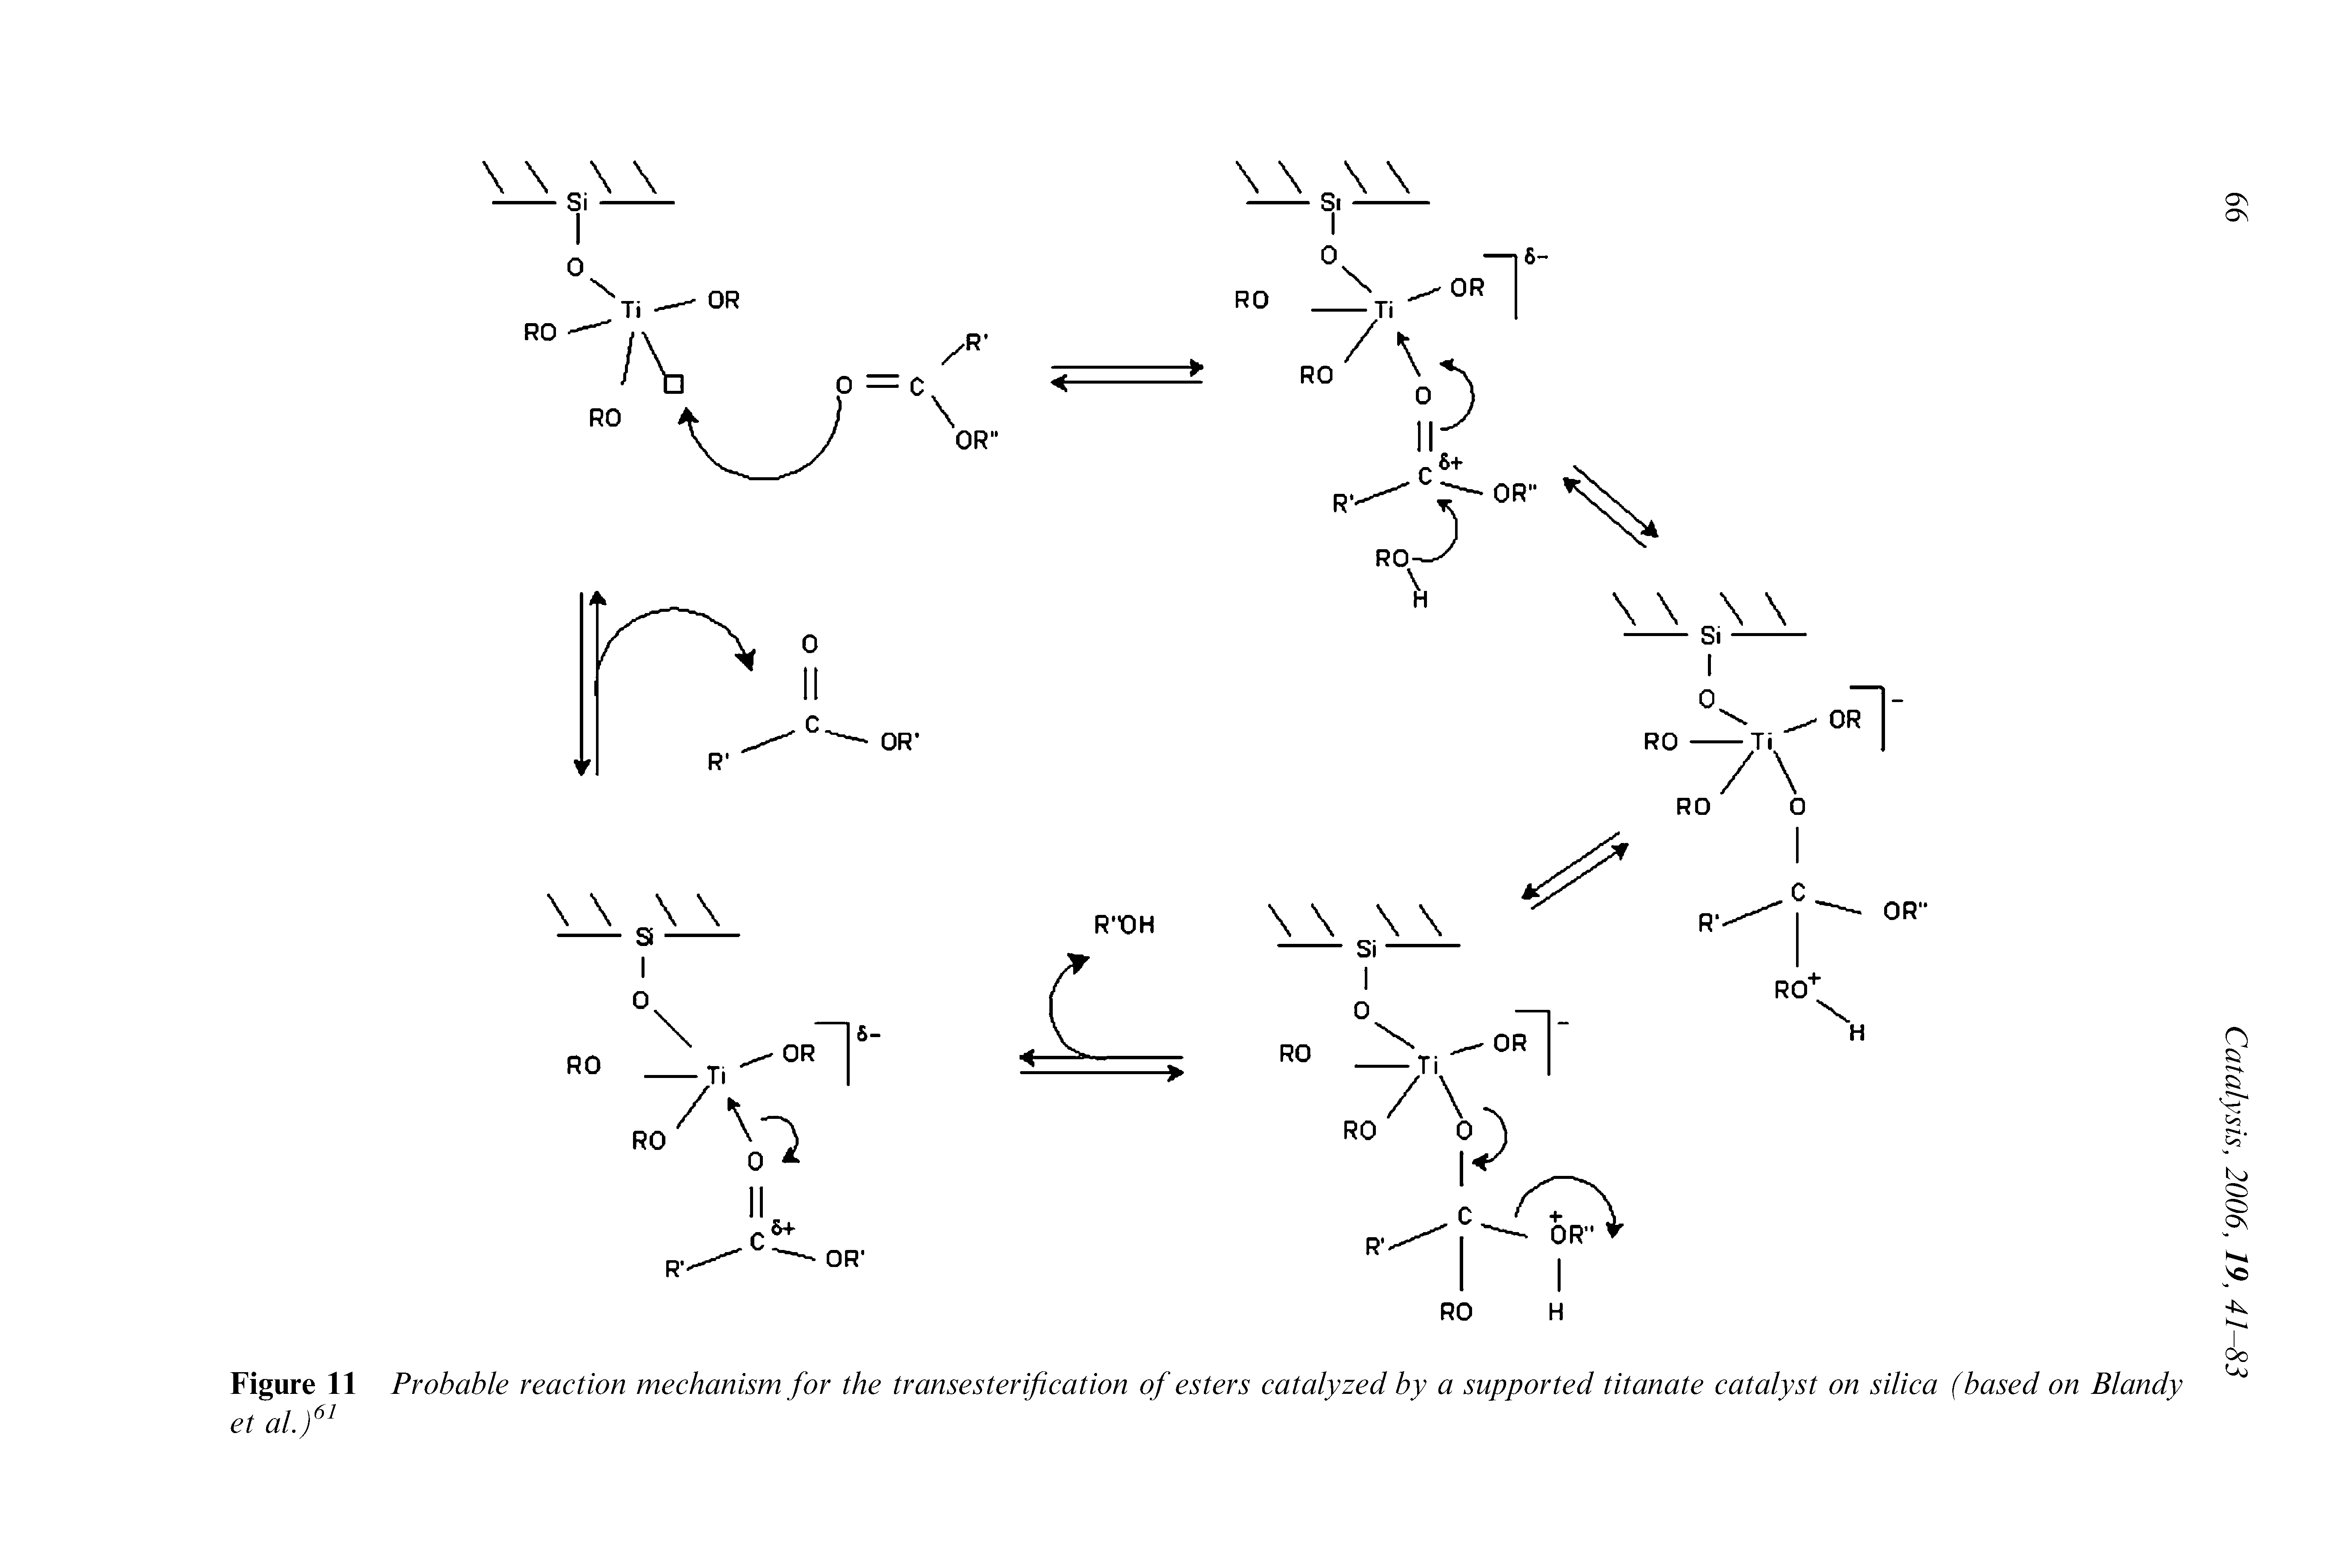 Figure 11 Probable reaction mechanism for the transesterification of esters catalyzed by a supported titanate catalyst on silica (based on Blandy et al.f ...